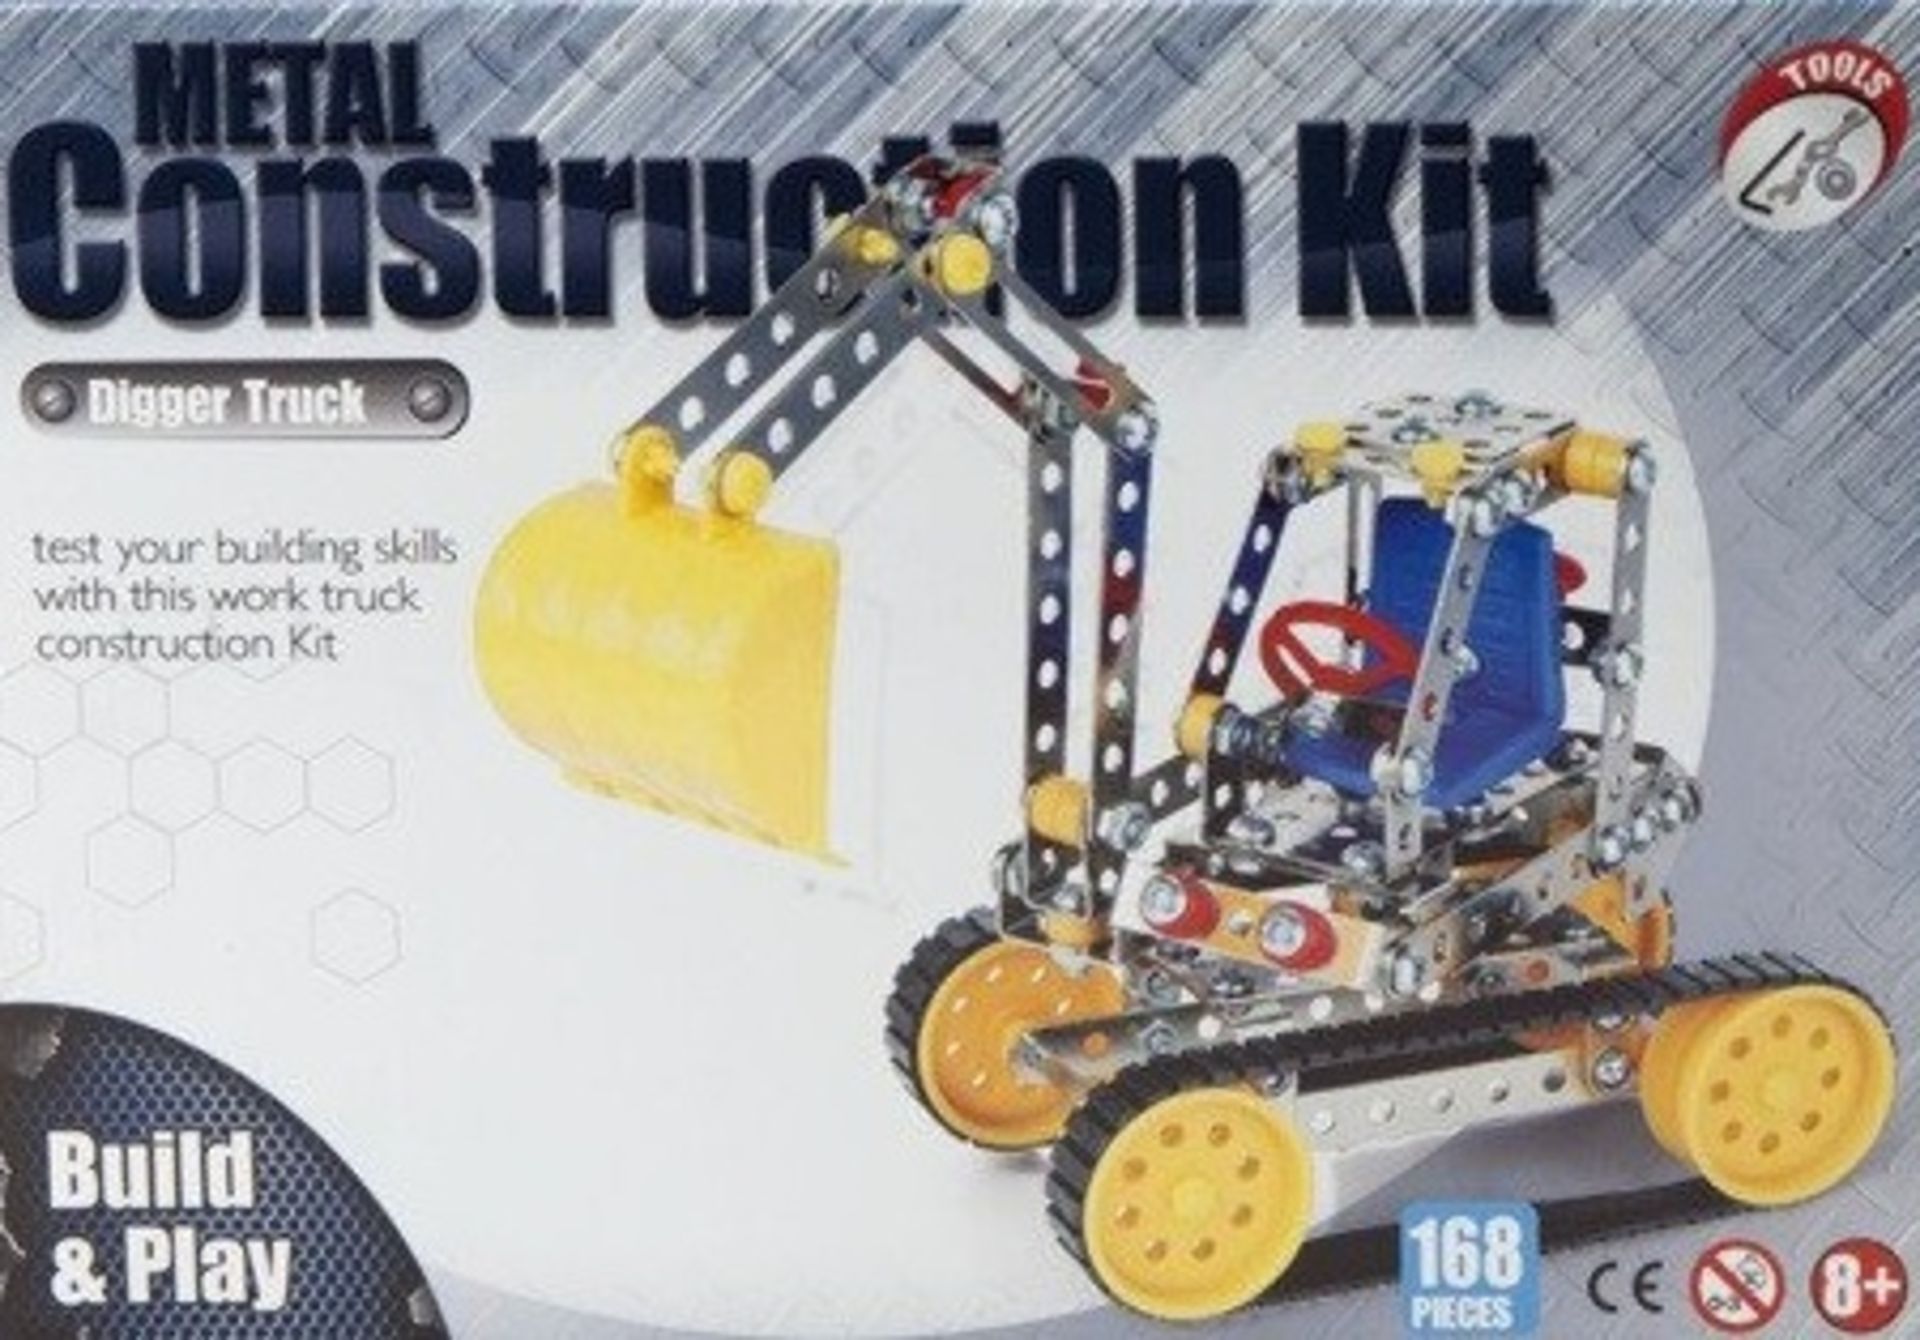 V Brand New Metal Construction Kit Digger Truck With 168pcs and Tools